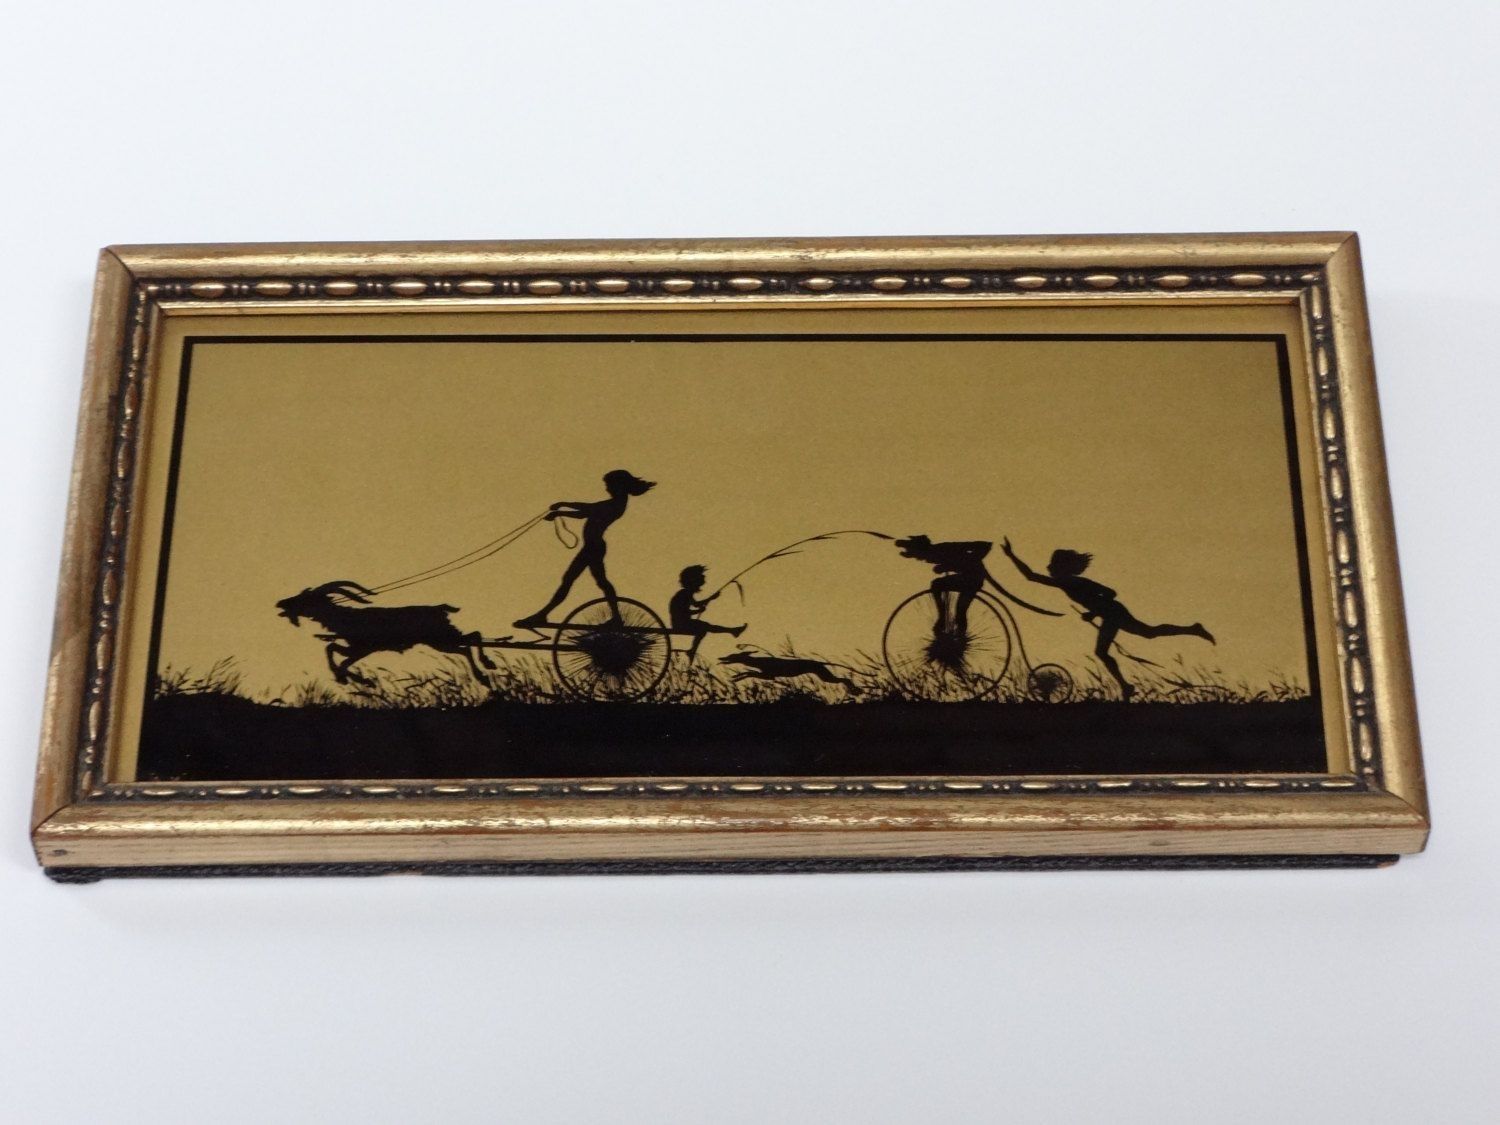 Art, Framed Art, Gold And Black Art, Silhouette, Diefenbach Throughout Black And Gold Wall Art (View 17 of 20)